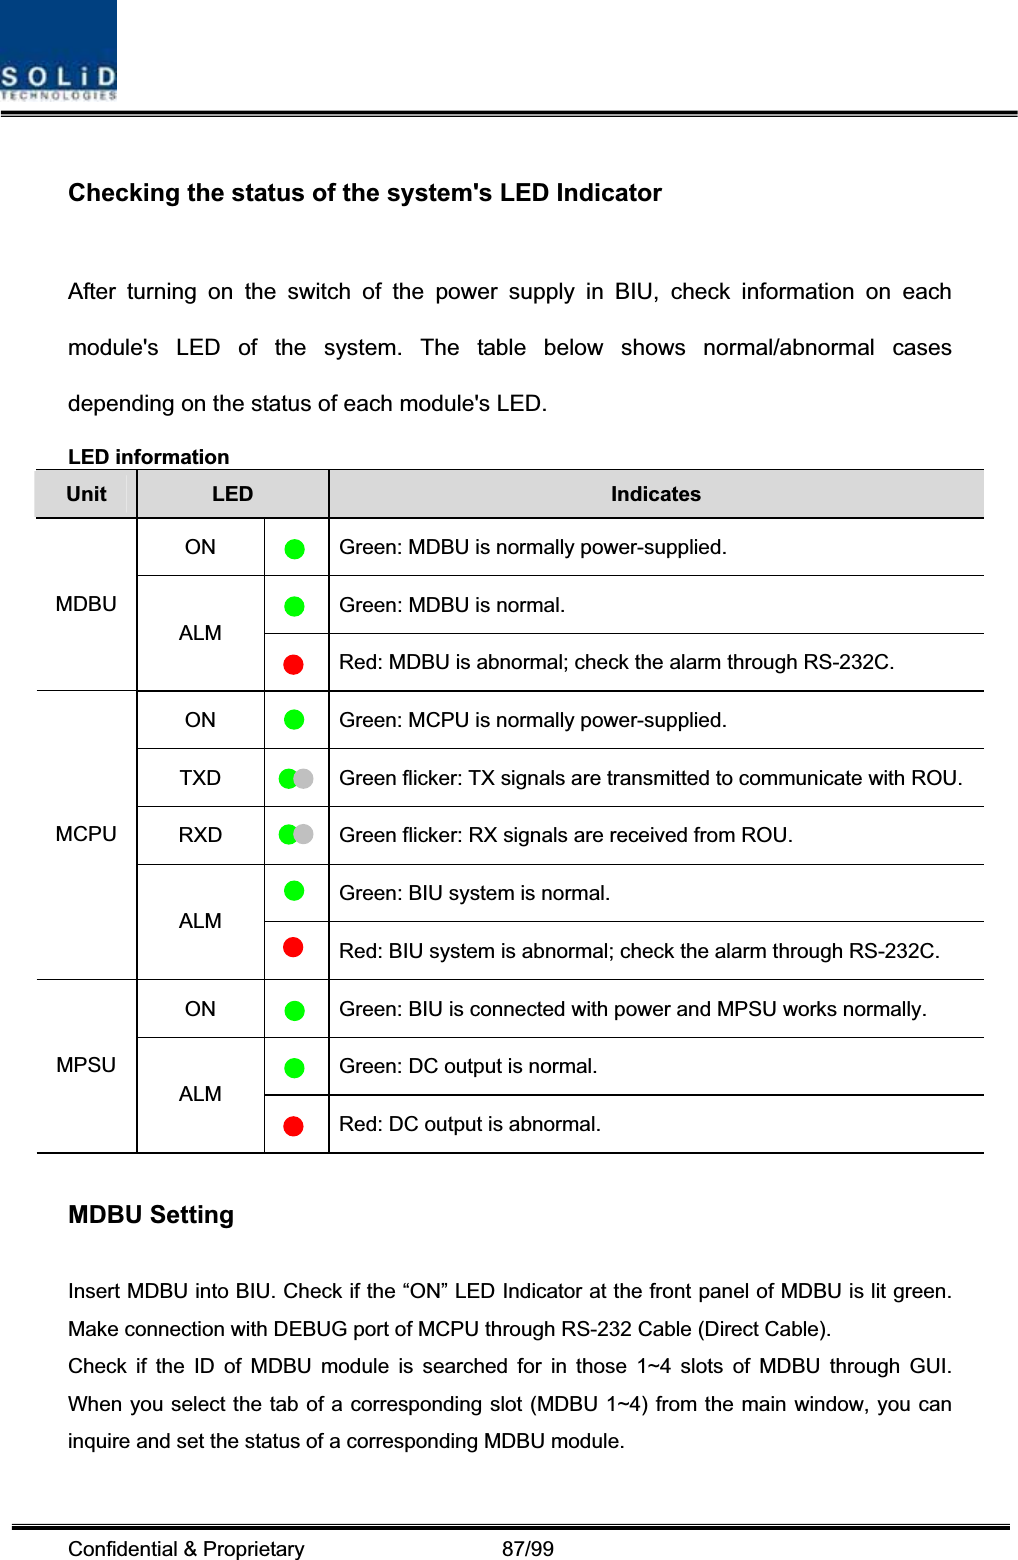 Confidential &amp; Proprietary                   87/99 Checking the status of the system&apos;s LED Indicator After turning on the switch of the power supply in BIU, check information on each module&apos;s LED of the system. The table below shows normal/abnormal cases depending on the status of each module&apos;s LED. LED information Unit LED Indicates ON    Green: MDBU is normally power-supplied.  Green: MDBU is normal.MDBUALM  Red: MDBU is abnormal; check the alarm through RS-232C.ON Green: MCPU is normally power-supplied.TXD Green flicker: TX signals are transmitted to communicate with ROU. RXD Green flicker: RX signals are received from ROU. Green: BIU system is normal.MCPUALMRed: BIU system is abnormal; check the alarm through RS-232C.ON    Green: BIU is connected with power and MPSU works normally.  Green: DC output is normal.MPSUALMRed: DC output is abnormal.MDBU Setting Insert MDBU into BIU. Check if the “ON” LED Indicator at the front panel of MDBU is lit green. Make connection with DEBUG port of MCPU through RS-232 Cable (Direct Cable). Check if the ID of MDBU module is searched for in those 1~4 slots of MDBU through GUI. When you select the tab of a corresponding slot (MDBU 1~4) from the main window, you can inquire and set the status of a corresponding MDBU module.   